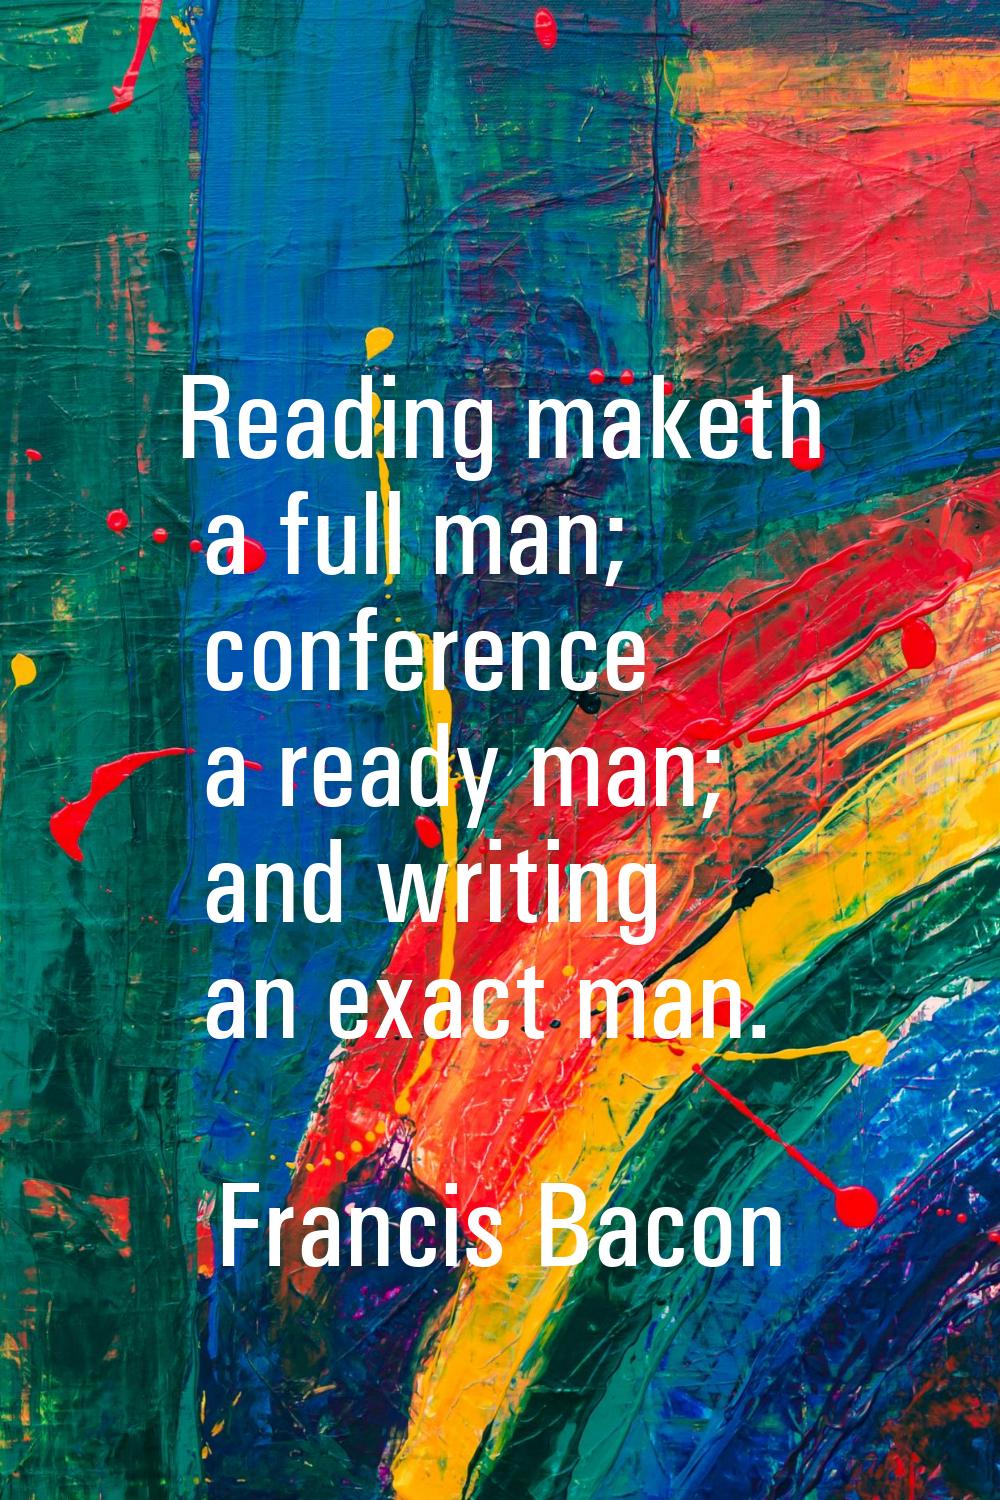 Reading maketh a full man; conference a ready man; and writing an exact man.